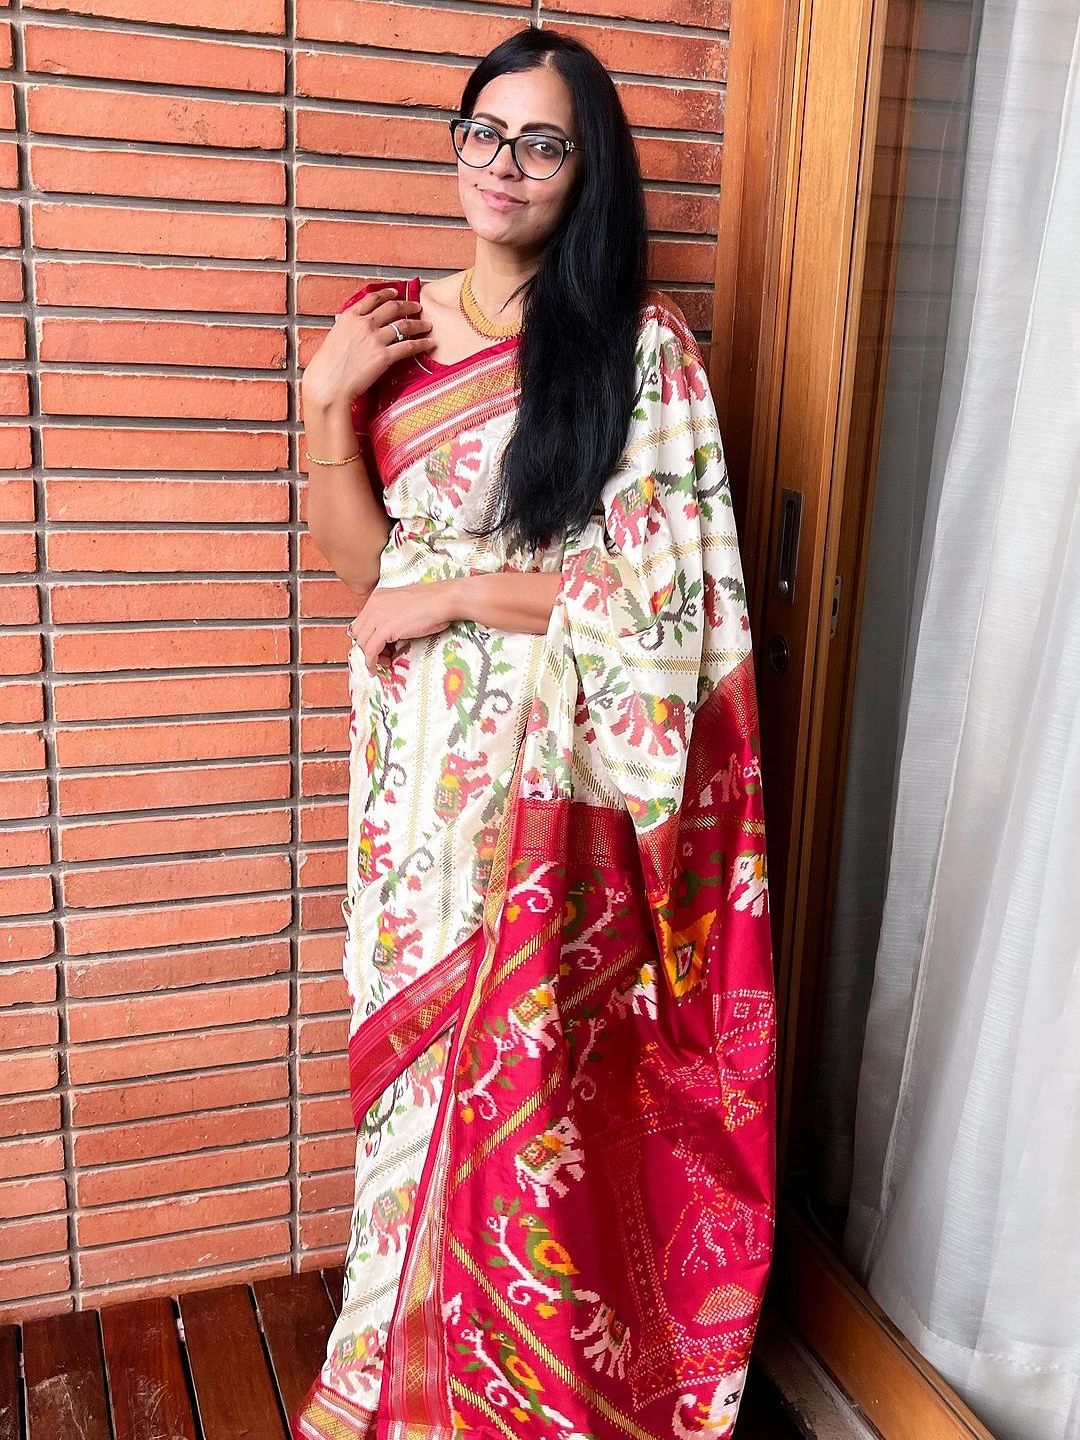 Gayathri quit her over two decades of corporate work to become an entrepreneur with a mission of bringing the sarees back in fashion.